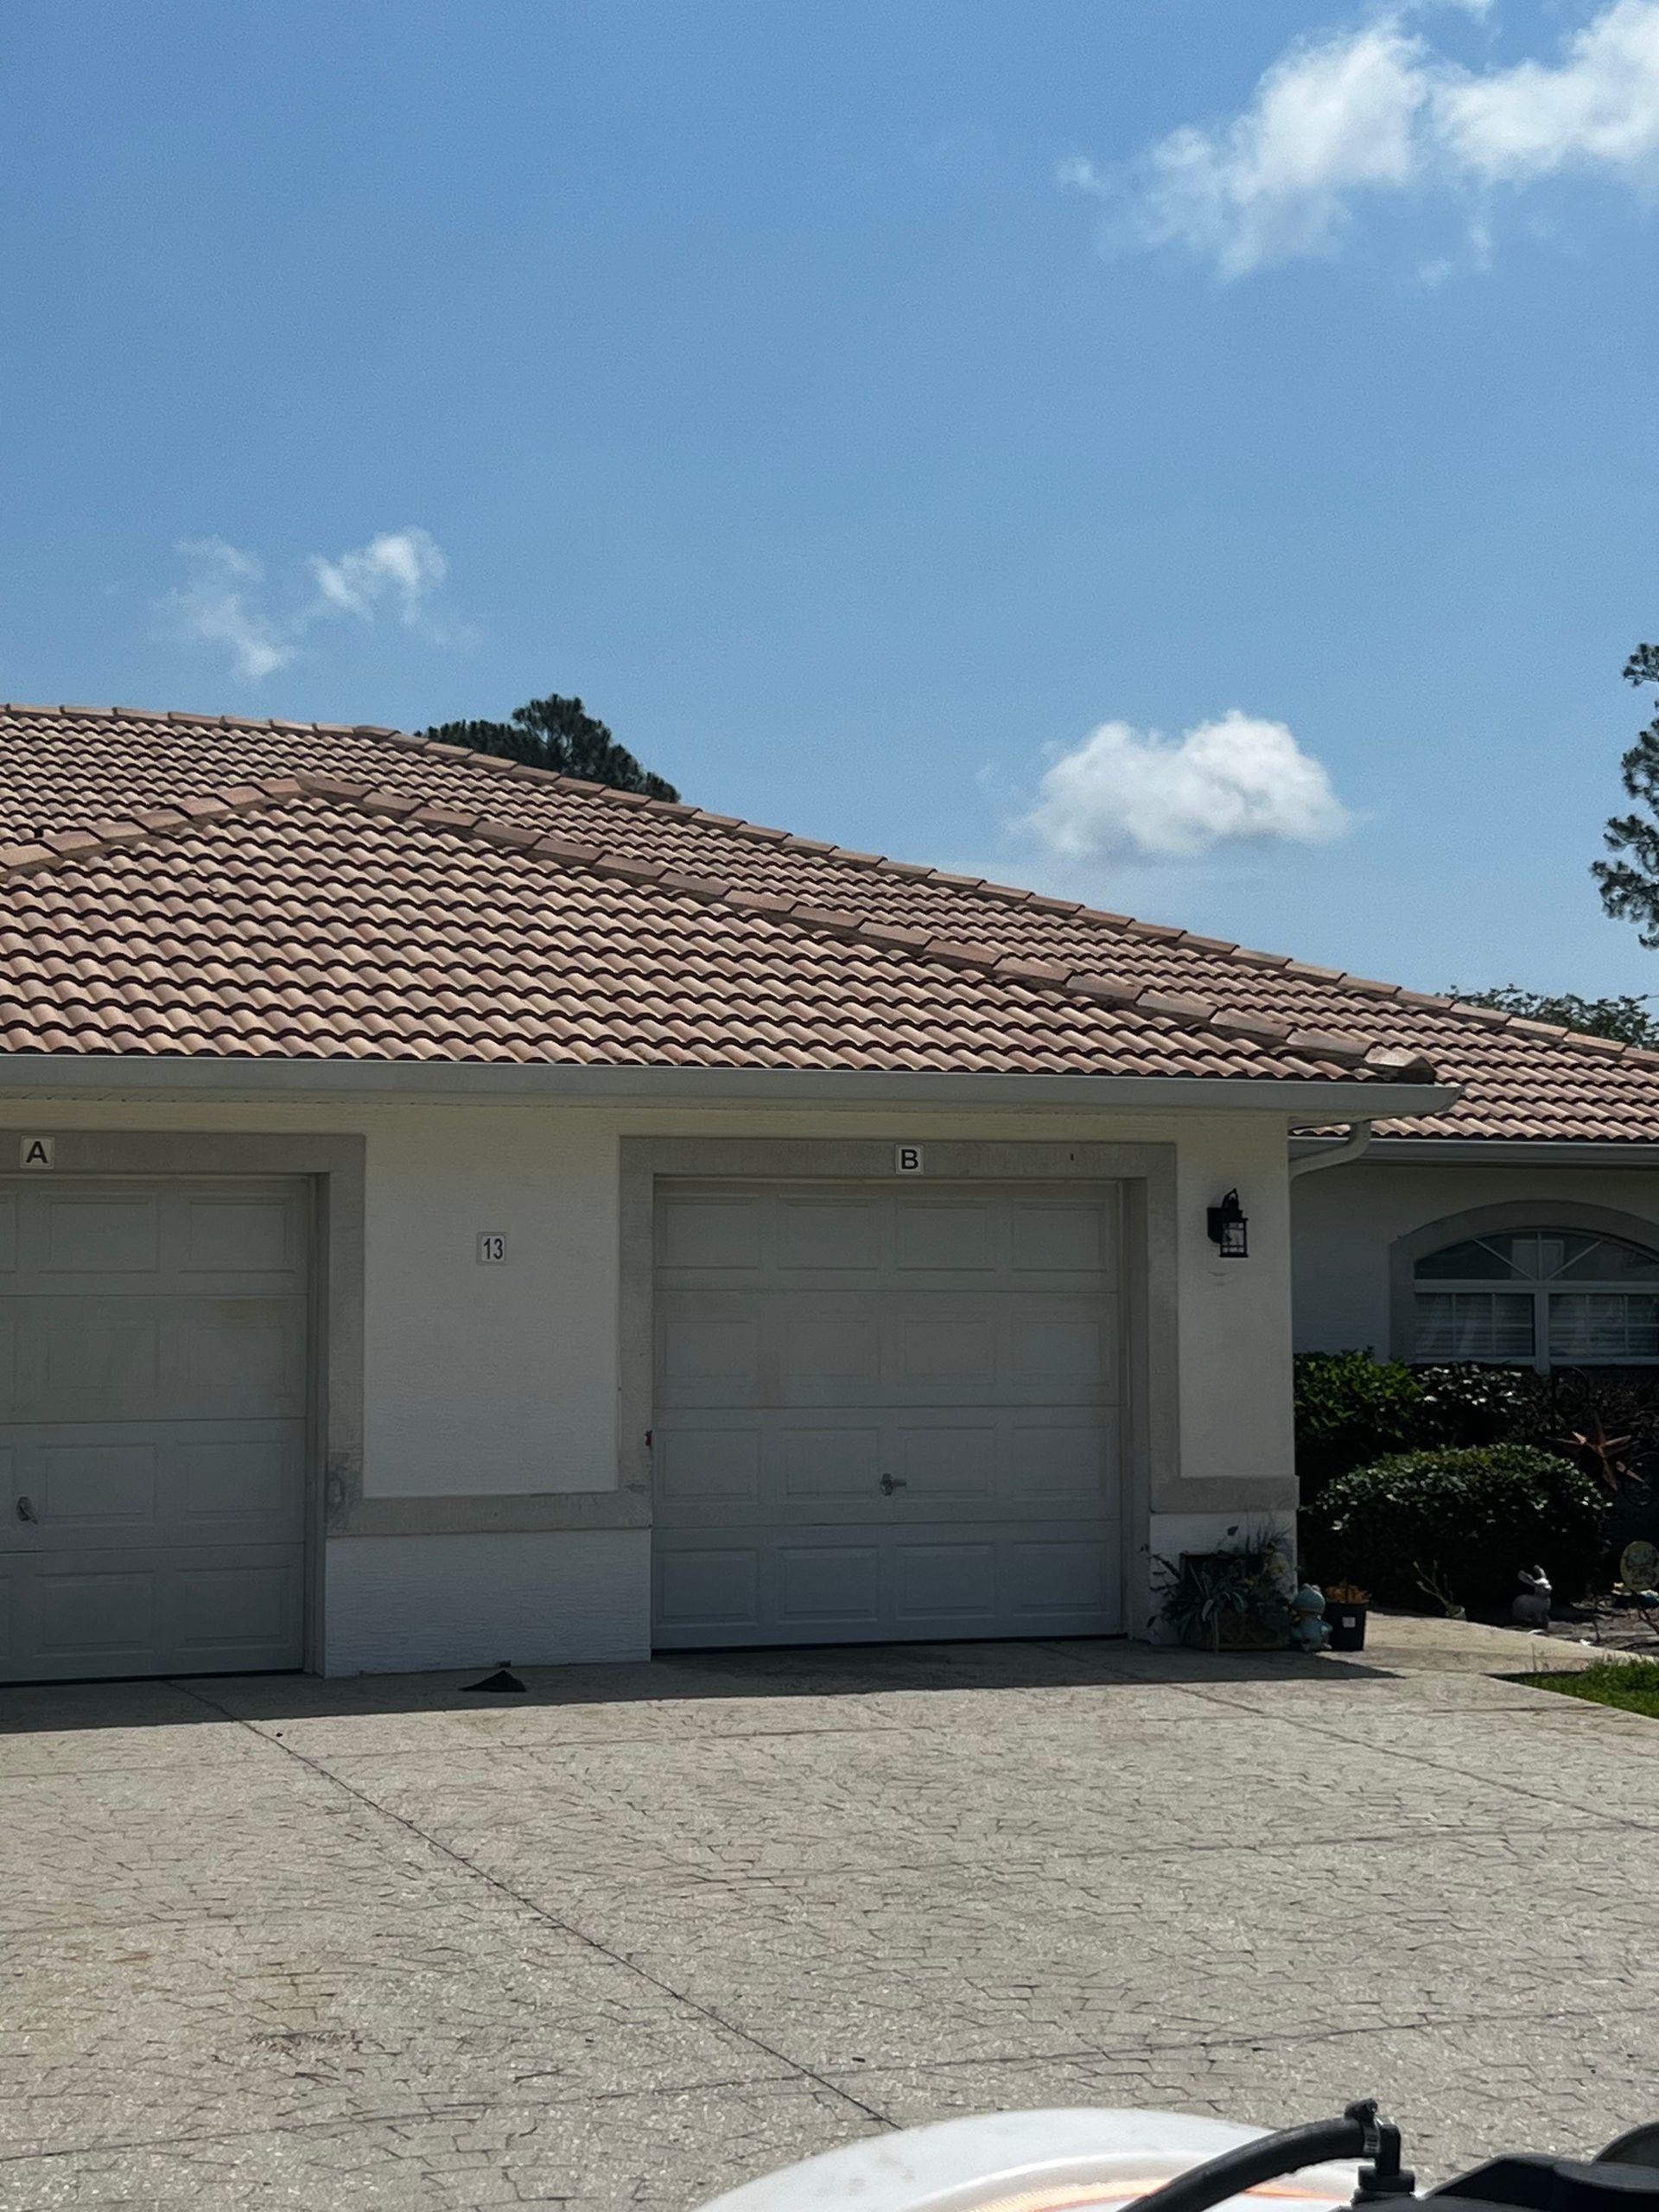 Expert Roof Washing Services in Apopka FL